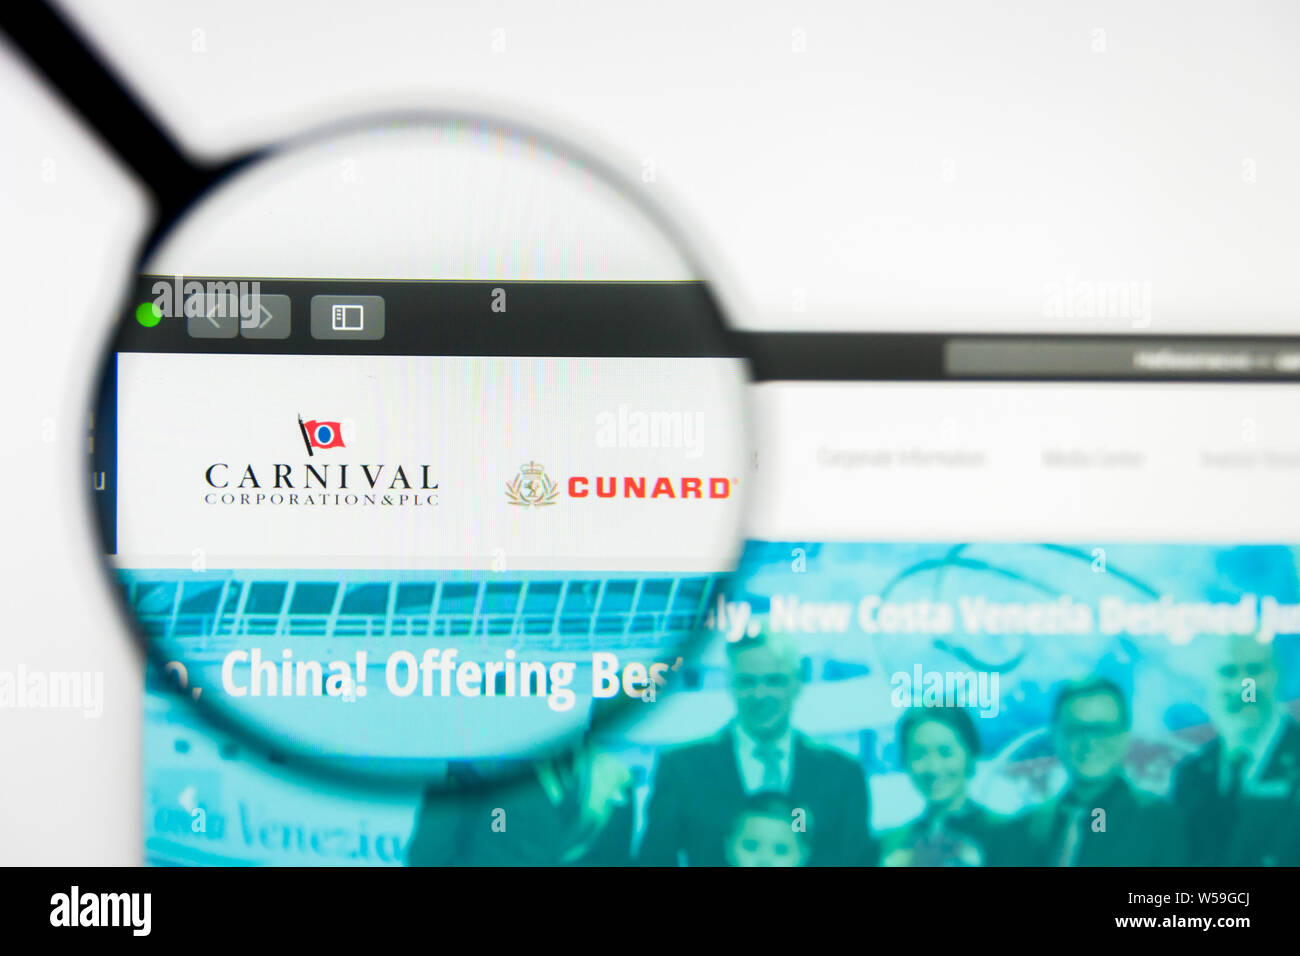 Richmond, Virginia, USA - 26 July 2019: Illustrative Editorial of Carnival Corporation website homepage. Carnival Corporation logo visible on screen. Stock Photo